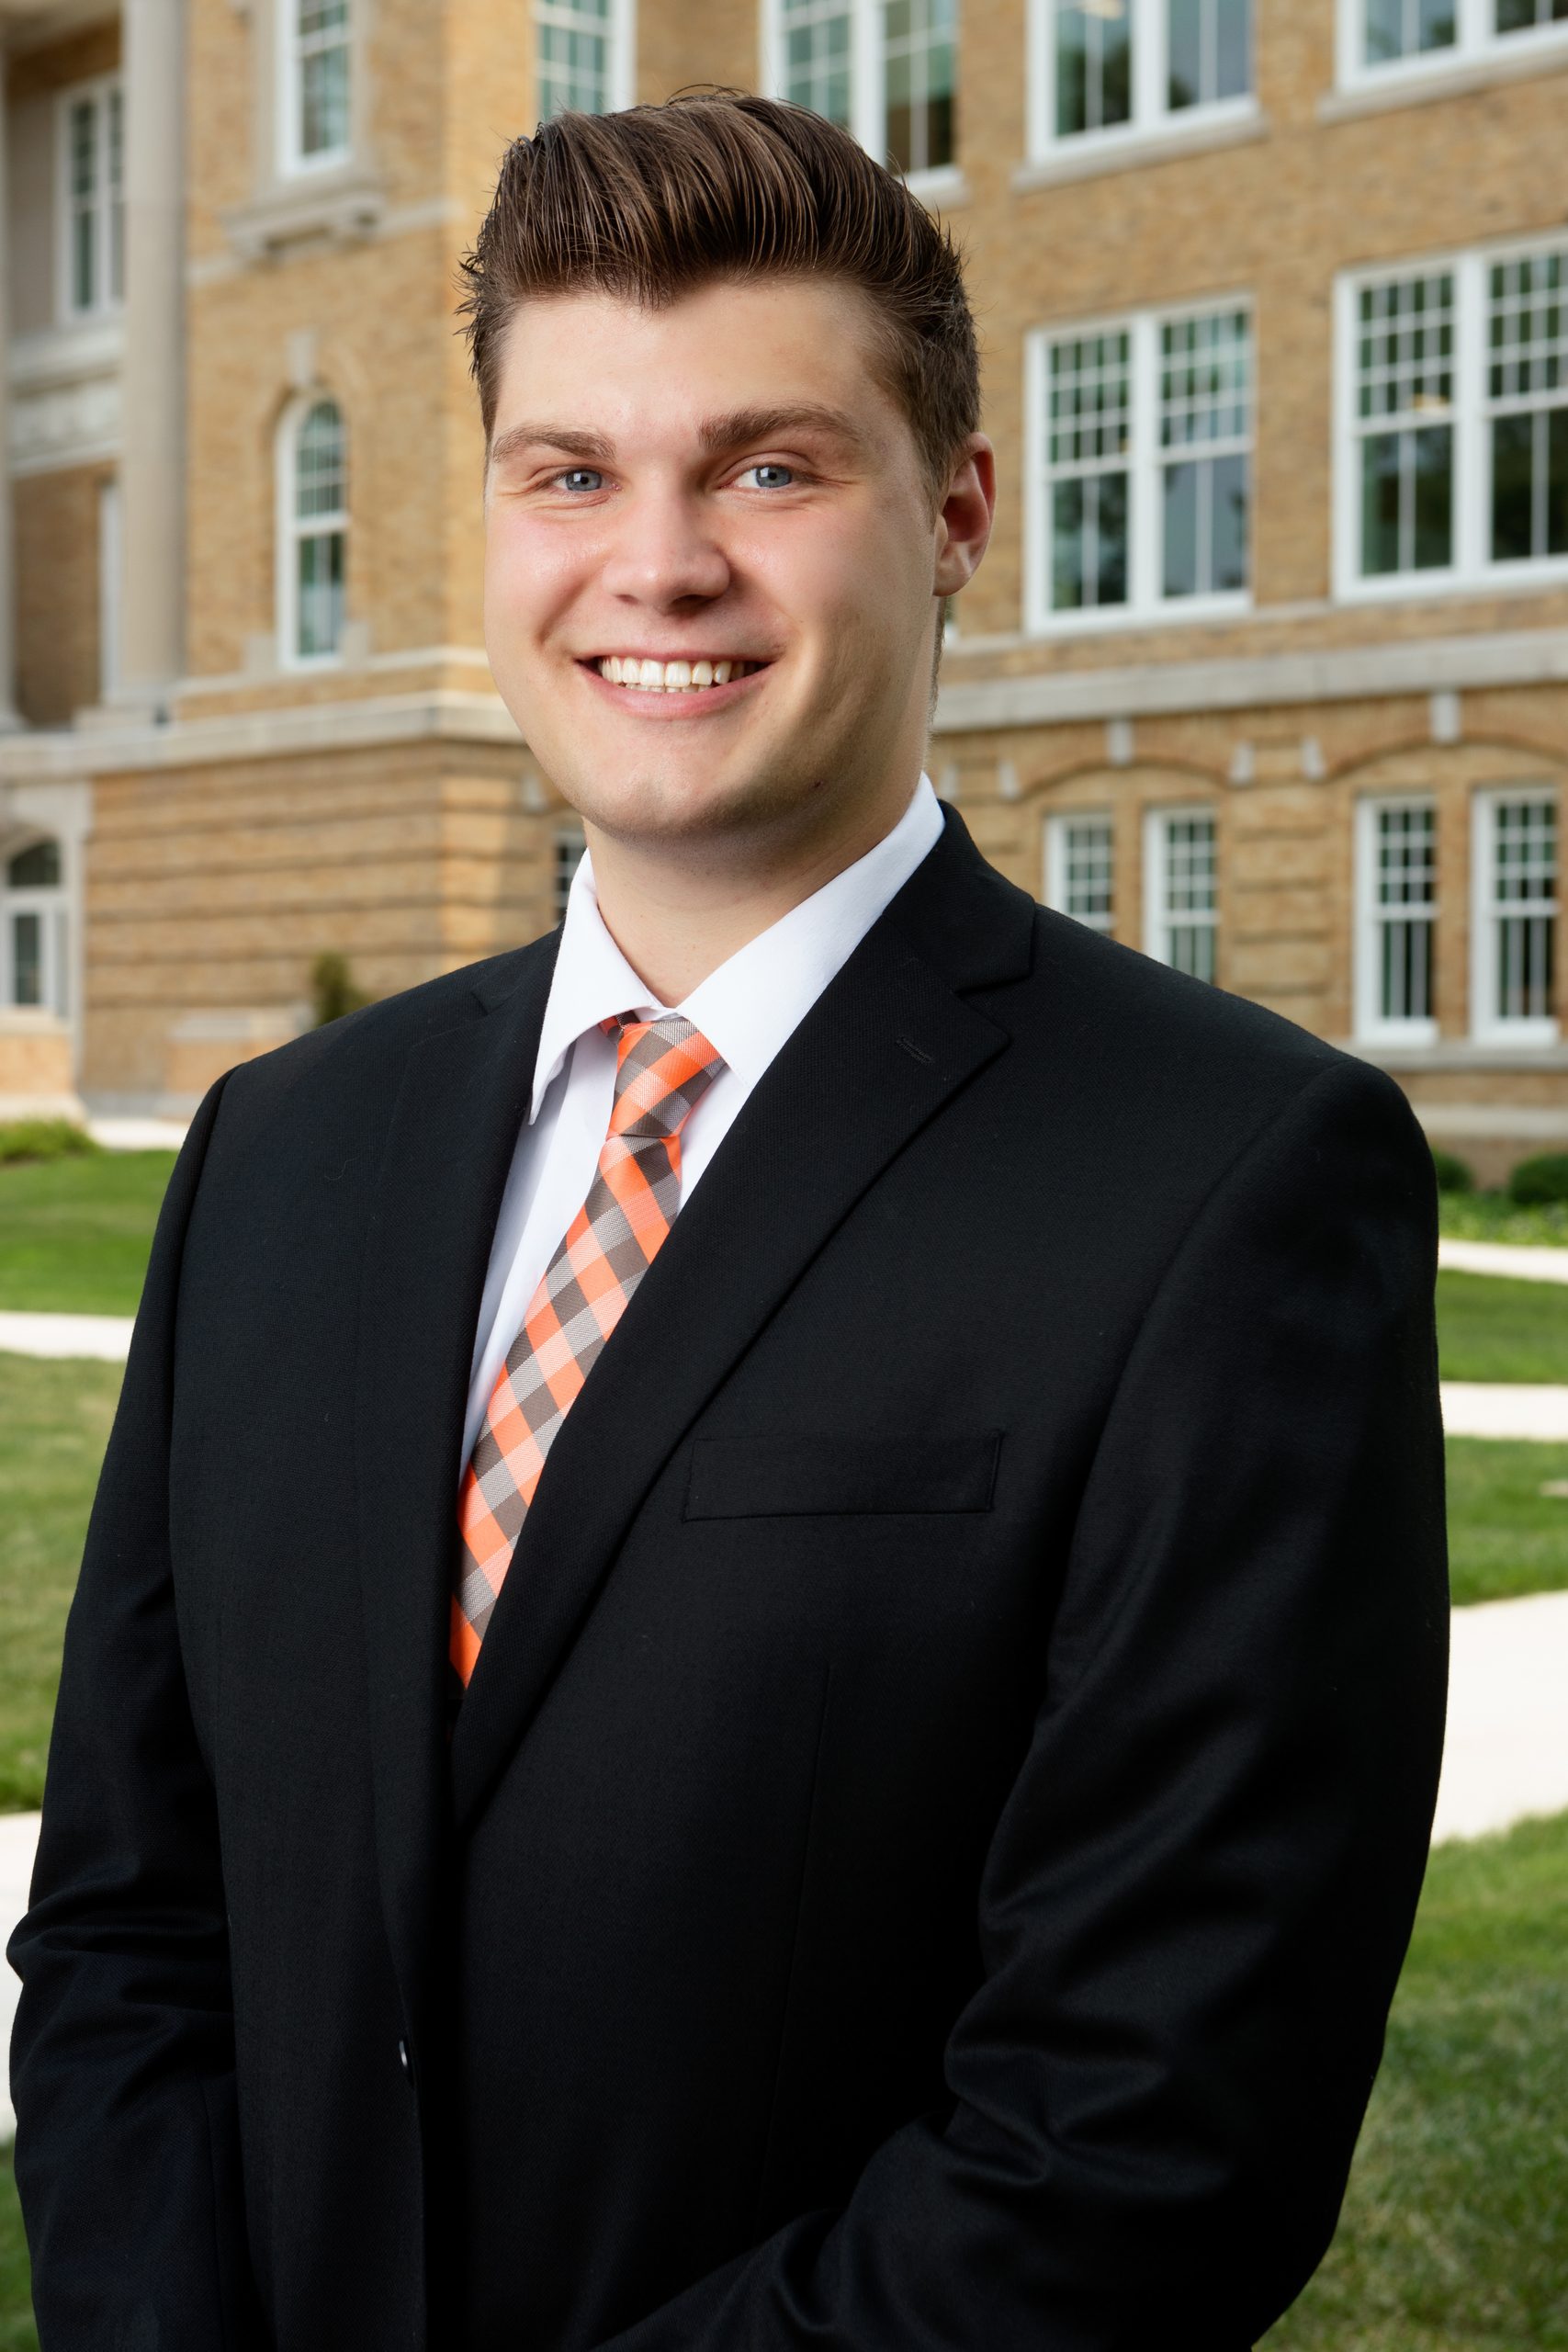 Nick Malendowski, wearing formal attire, standing in front of University Hall at Bowling Green State University